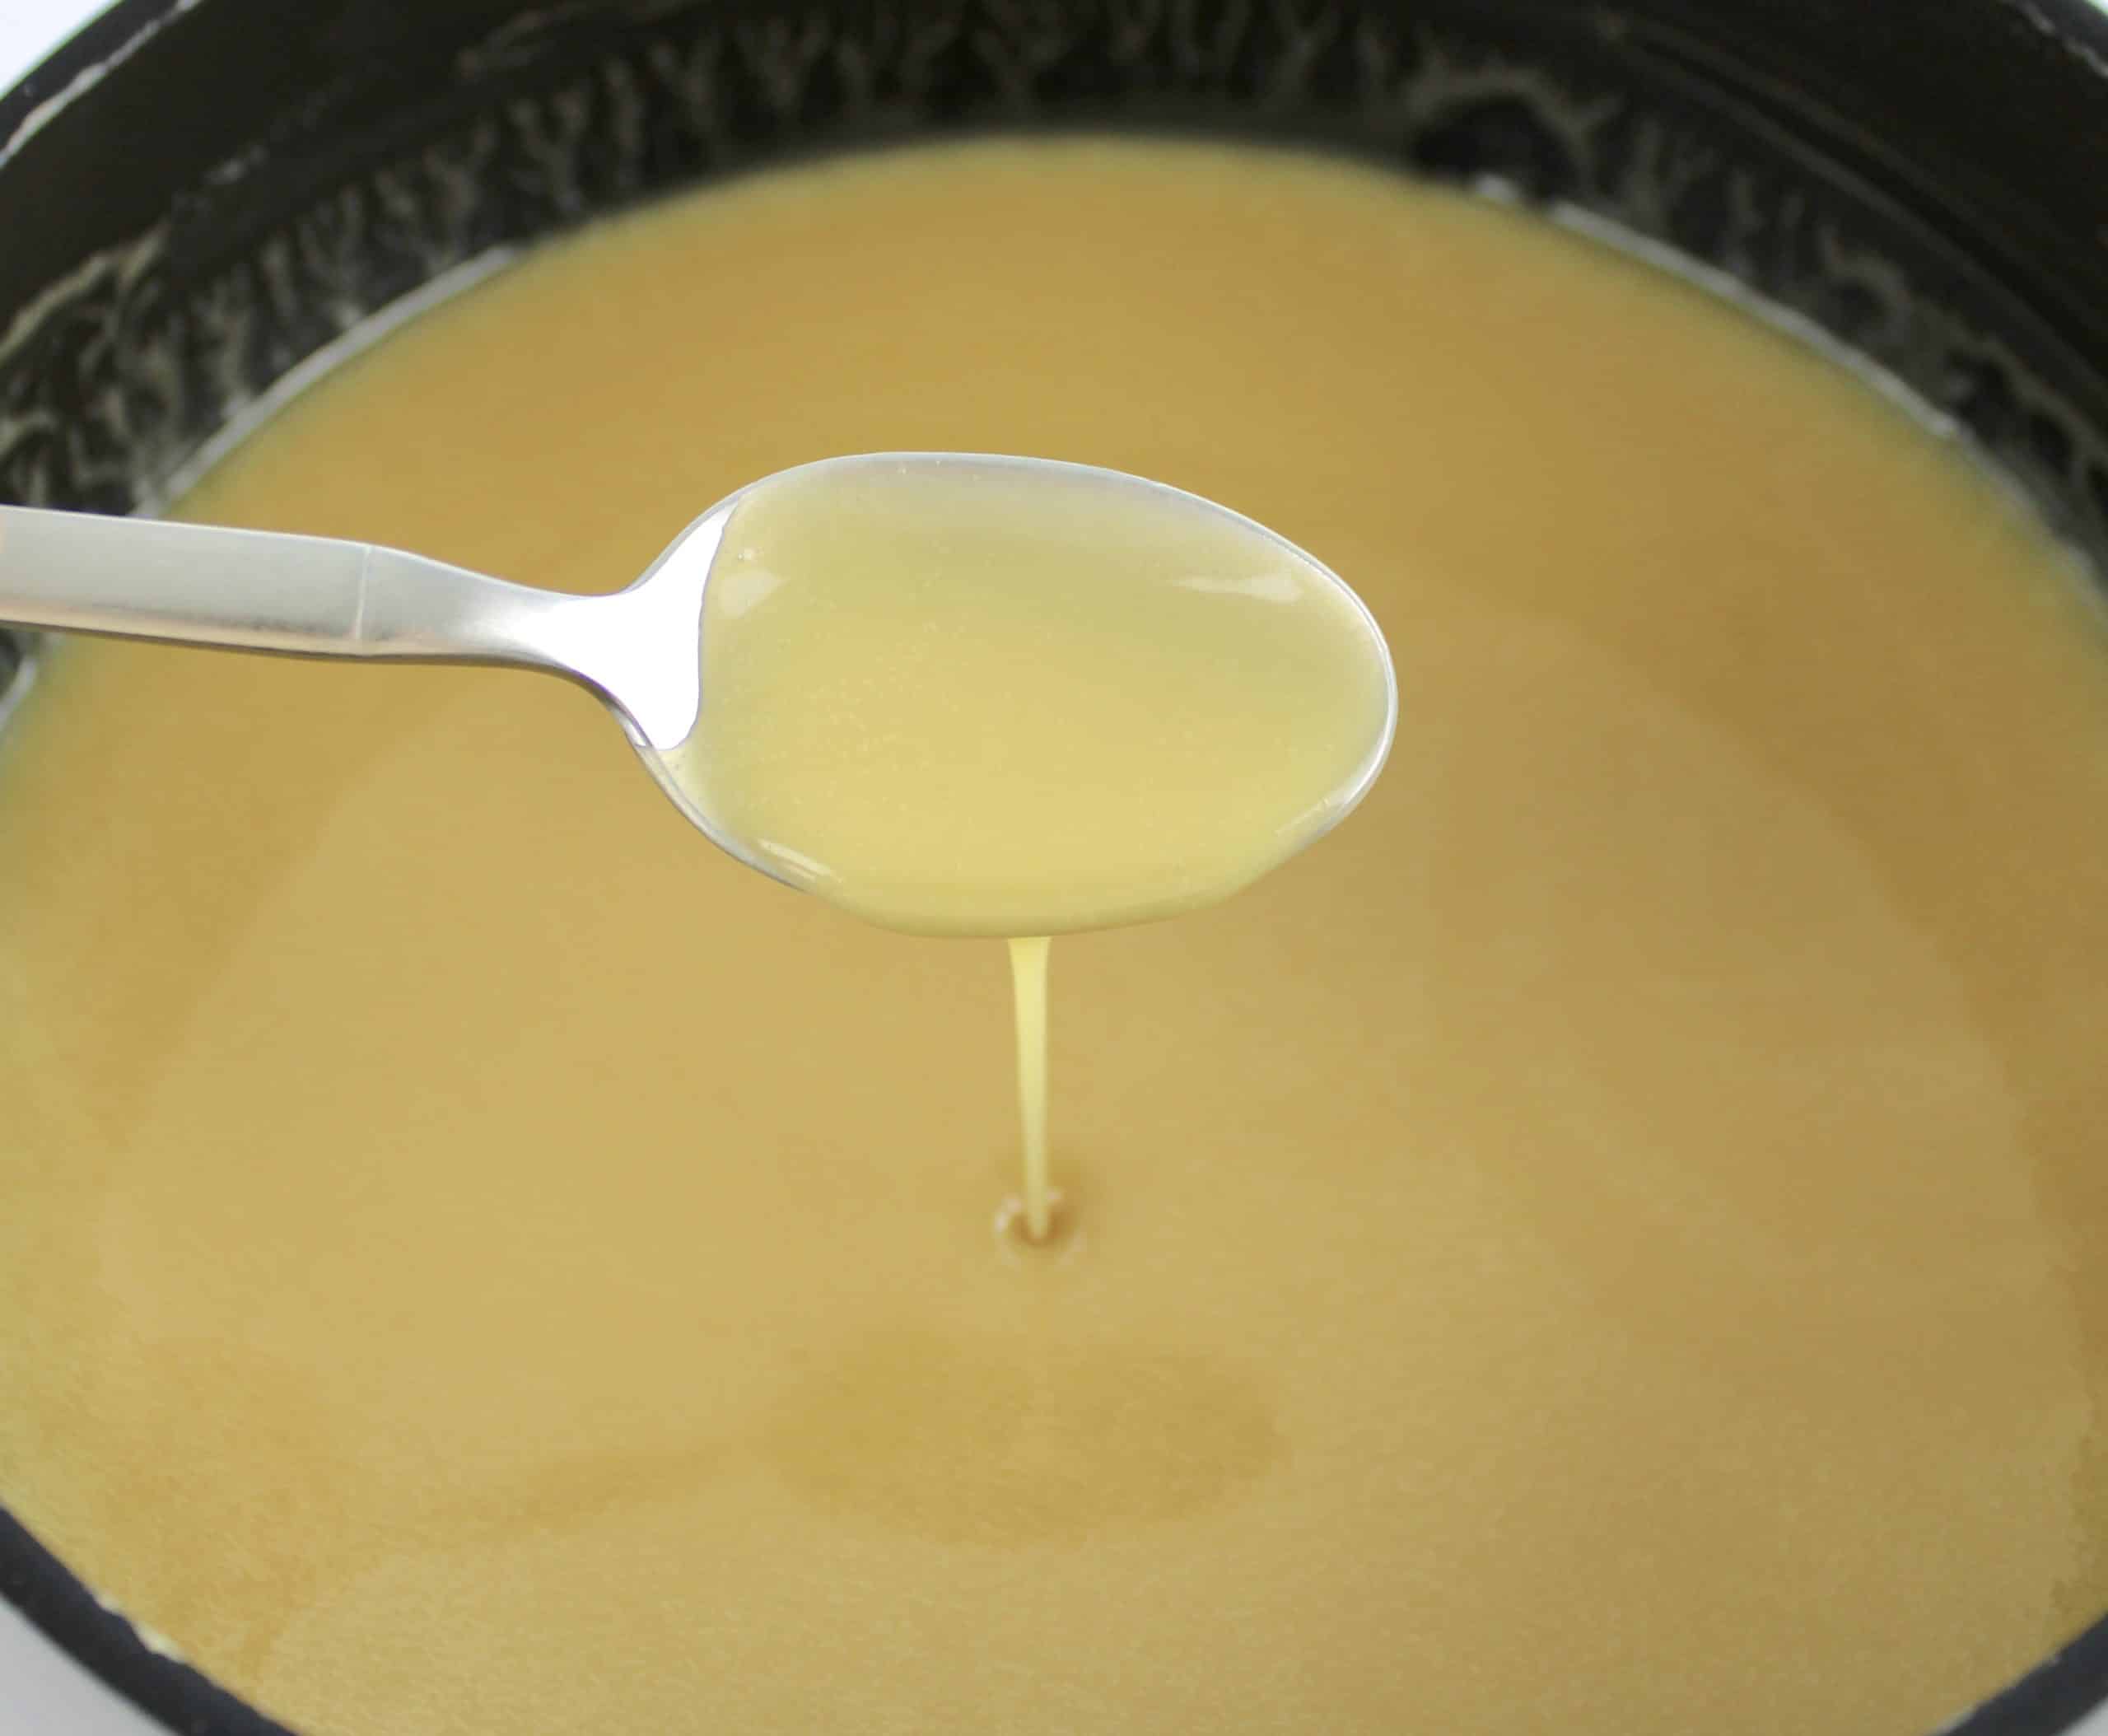 sweetened condensed milk in saucepan with spoon dripping some